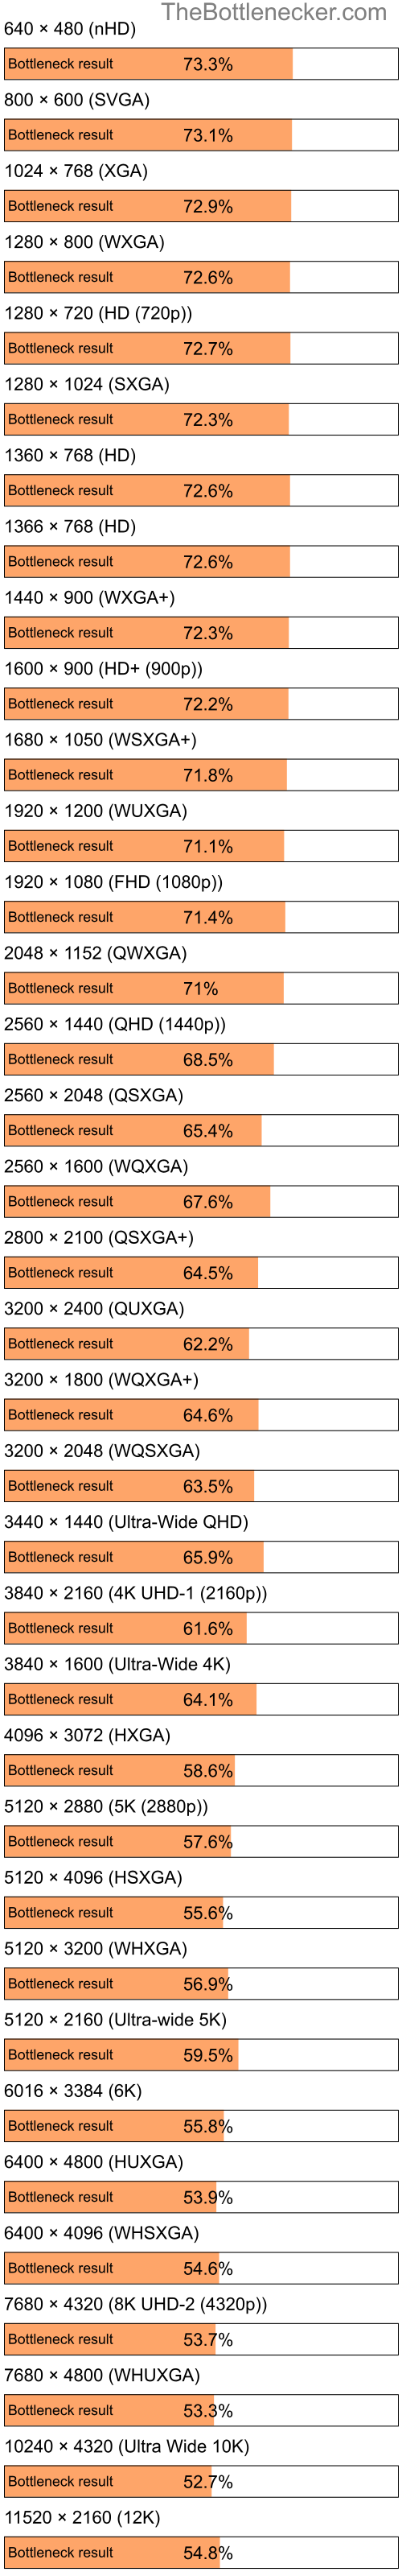 Bottleneck results by resolution for AMD Phenom 9850 and AMD Radeon RX 6700 XT in General Tasks